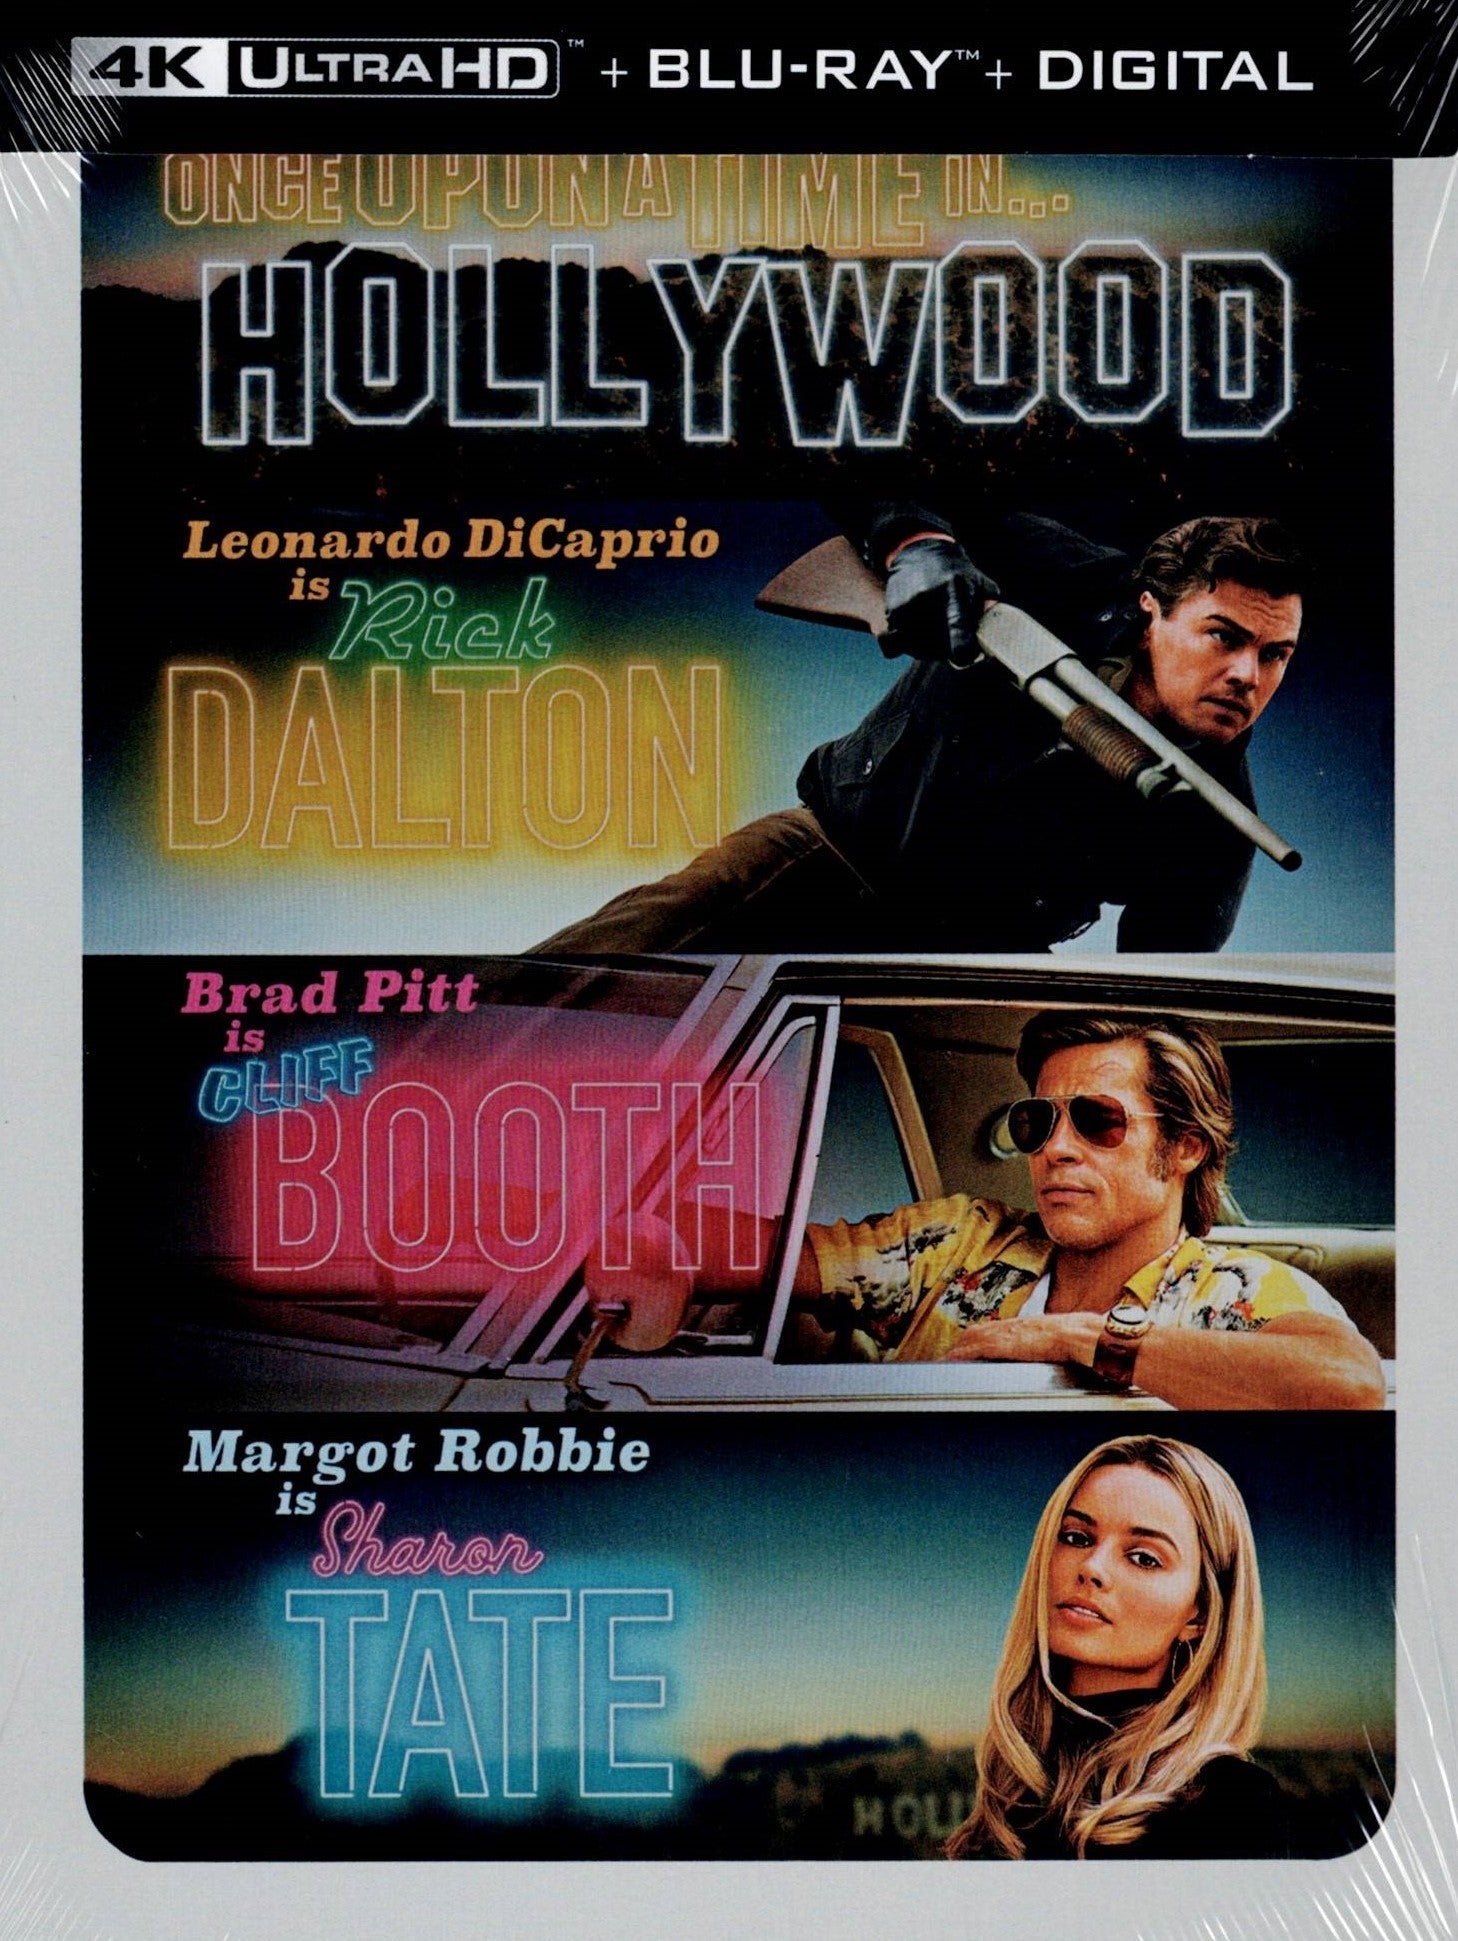 ONCE UPON A TIME IN HOLLYWOOD (LIMITED EDITION) 4K UHD/BLU-RAY STEELBOOK